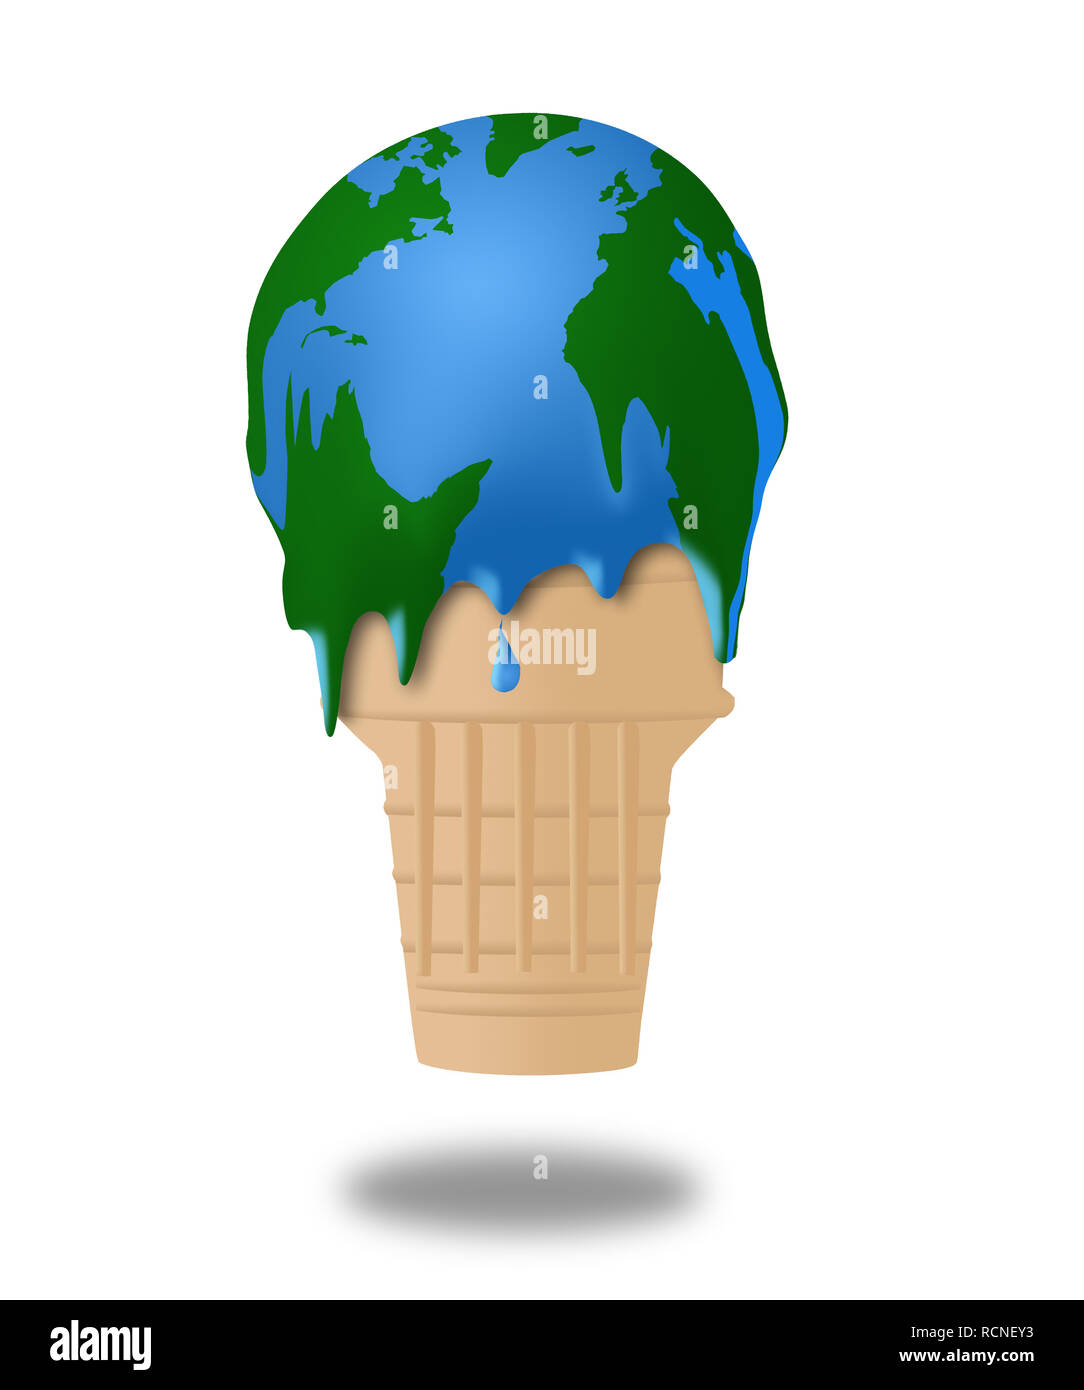 Global warming is illustrated with a melting ice cream cone and the ice cream appears to also be a globe map of earth. This is an illustration. Stock Photo